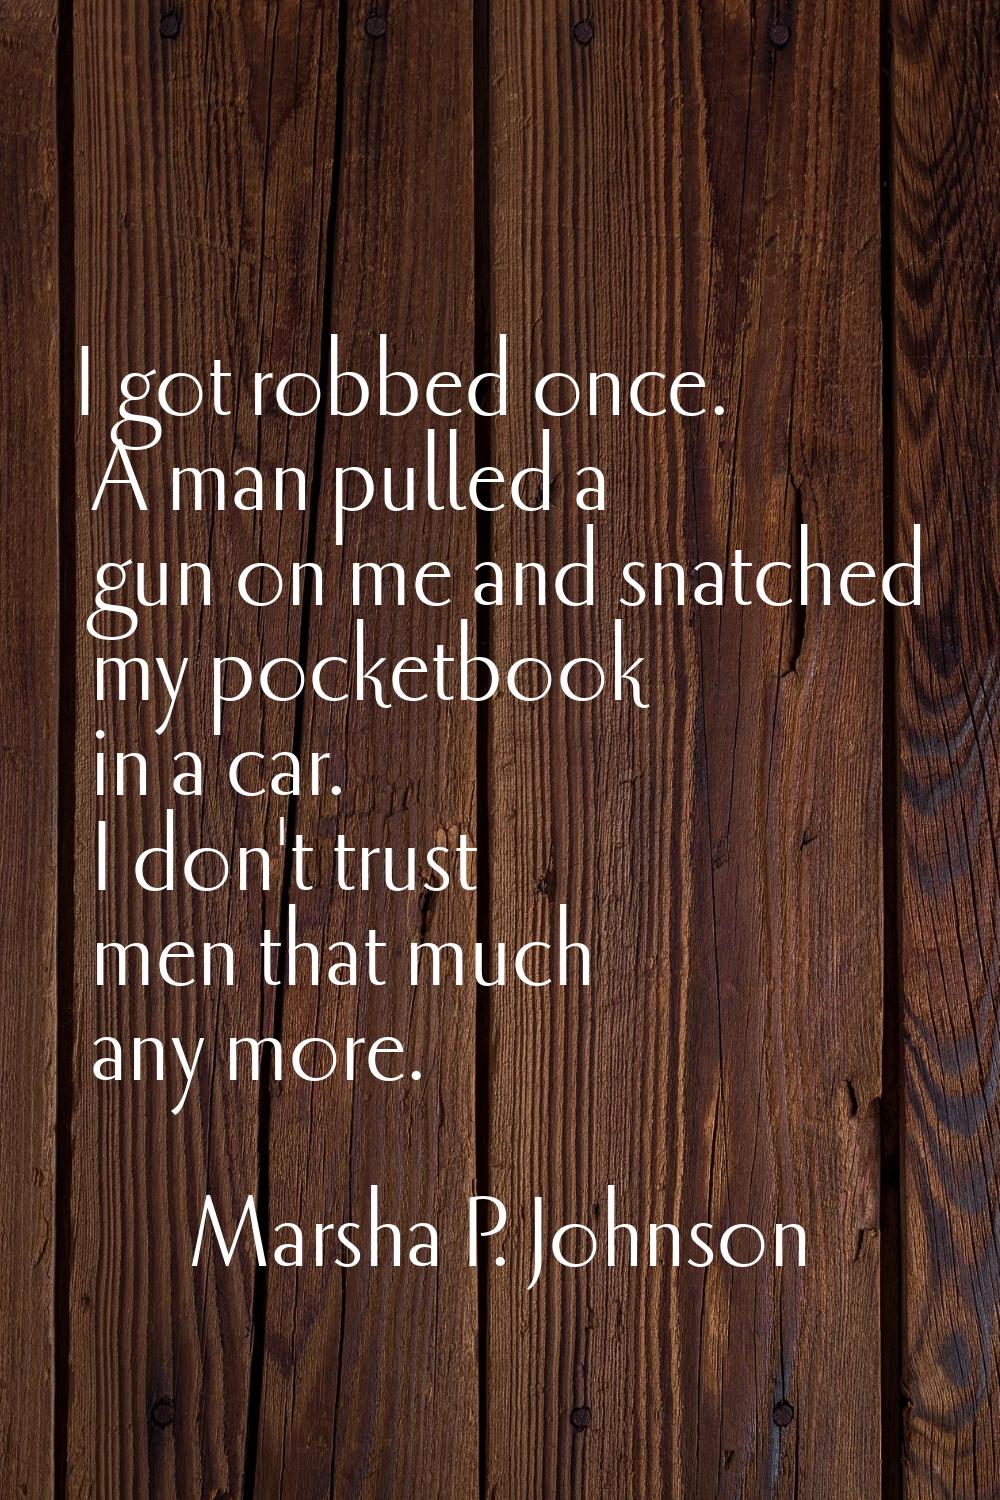 I got robbed once. A man pulled a gun on me and snatched my pocketbook in a car. I don't trust men 